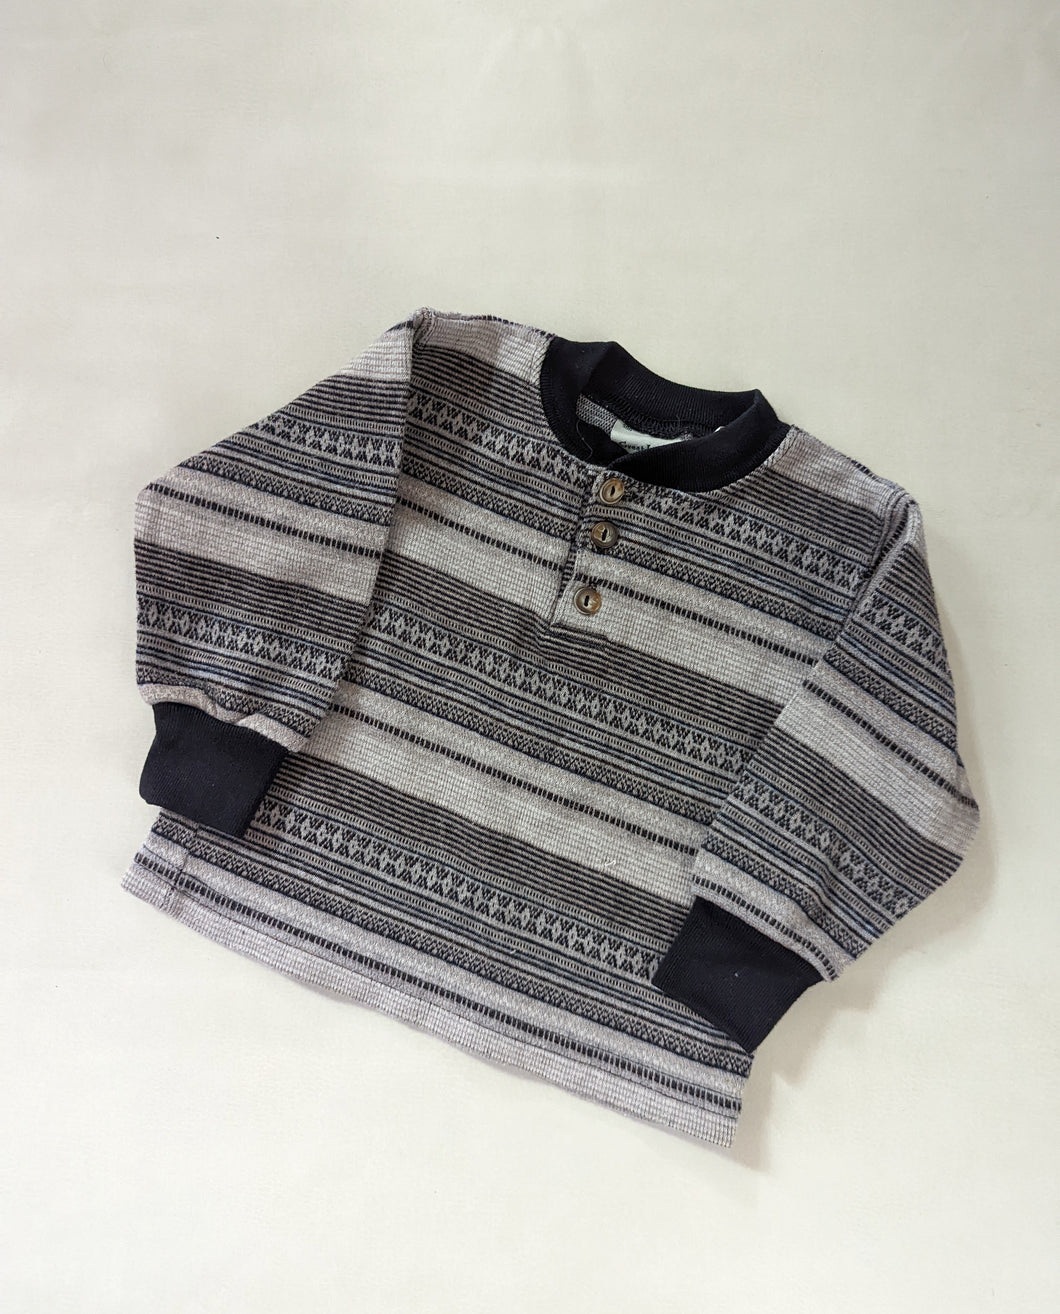 Great Land Striped Top 24m